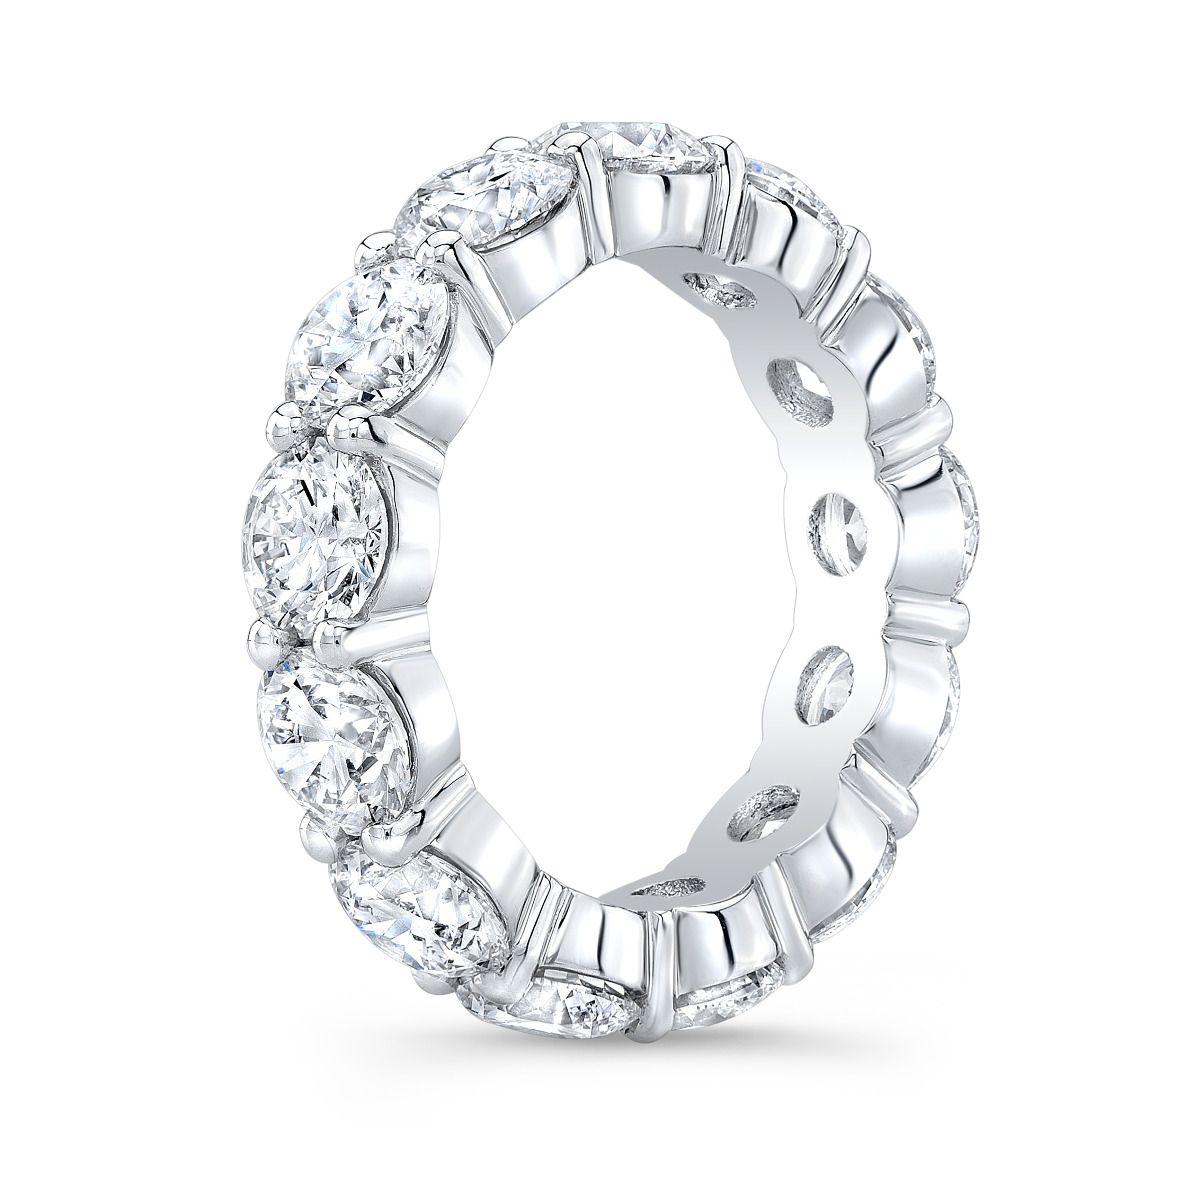 Diamond Eternity Band set with an impressive total weight of 7.15 carats of round diamonds, each meticulously certified by the Gemological Institute of America (GIA). Crafted with exquisite precision, this stunning eternity band features a shared